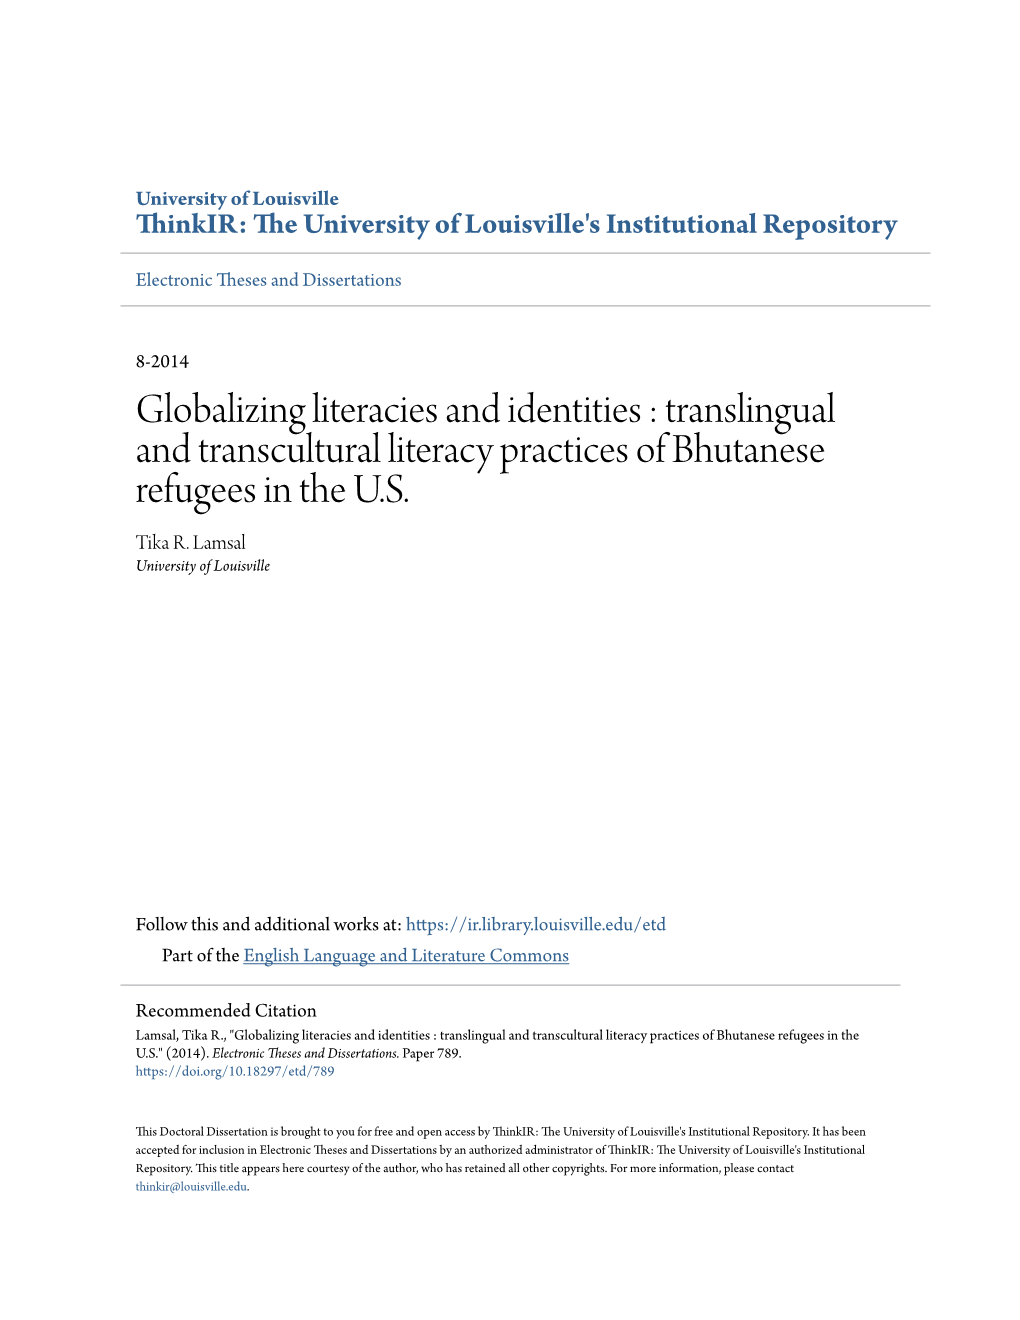 Translingual and Transcultural Literacy Practices of Bhutanese Refugees in the U.S